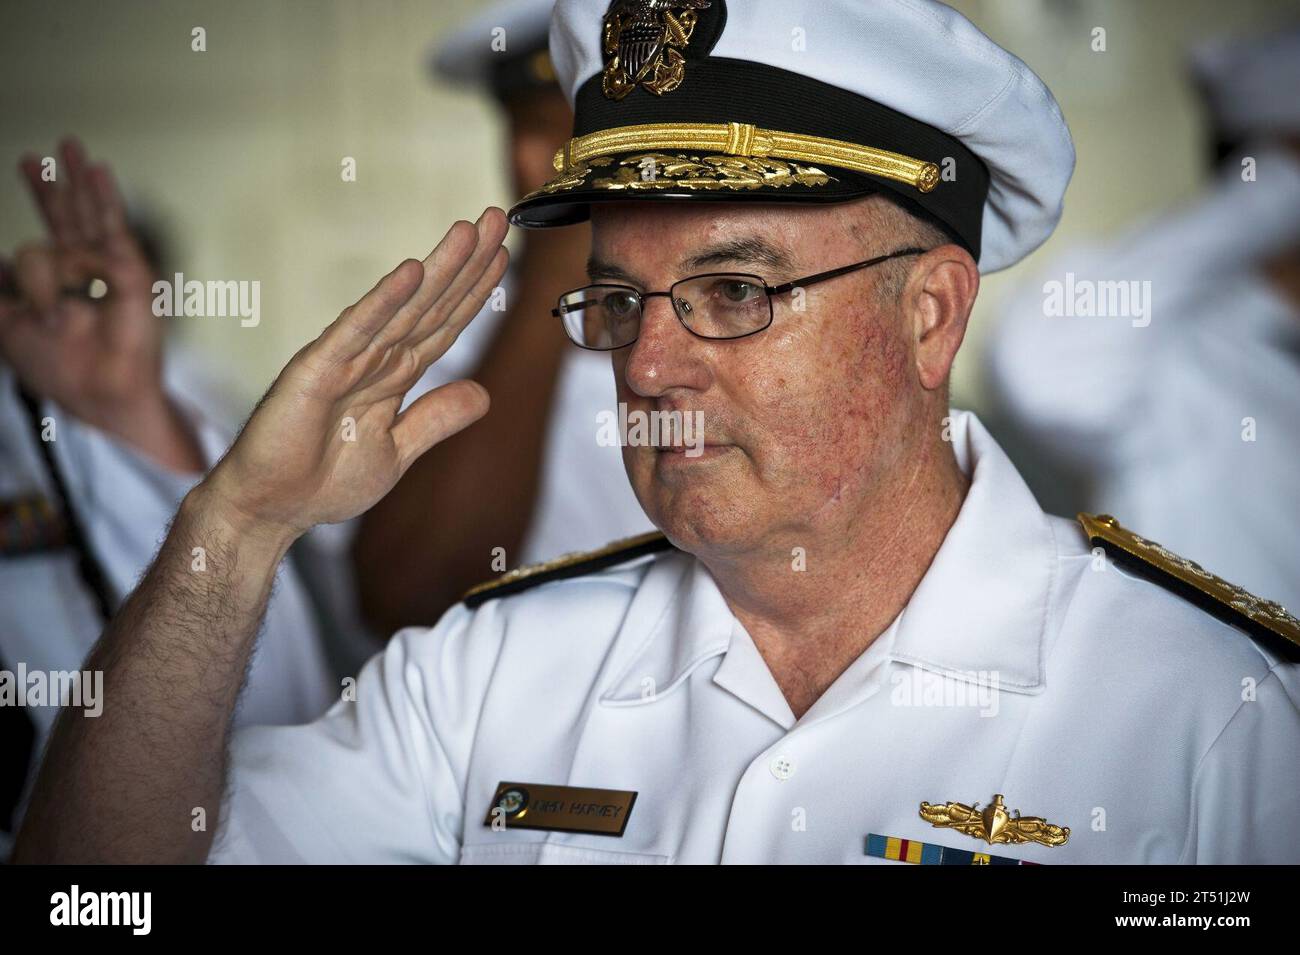 110622KK576-015 VIRGINIA BEACH, Va. (June 22, 2011) Adm. John C. Harvey Jr., commander of U.S. Fleet Forces Command, salutes as he is piped aboard during the Navy Cyber Forces change of command ceremony at Joint Expeditionary Base Little Creek-Fort Story. Rear Adm. Gretchen S. Herbert relieved Rear Adm. Thomas P. Meek as commander of Navy Cyber Forces, the Navy's global type commander responsible for generating current and future cyber readiness in the Fleet. Navy Stock Photo